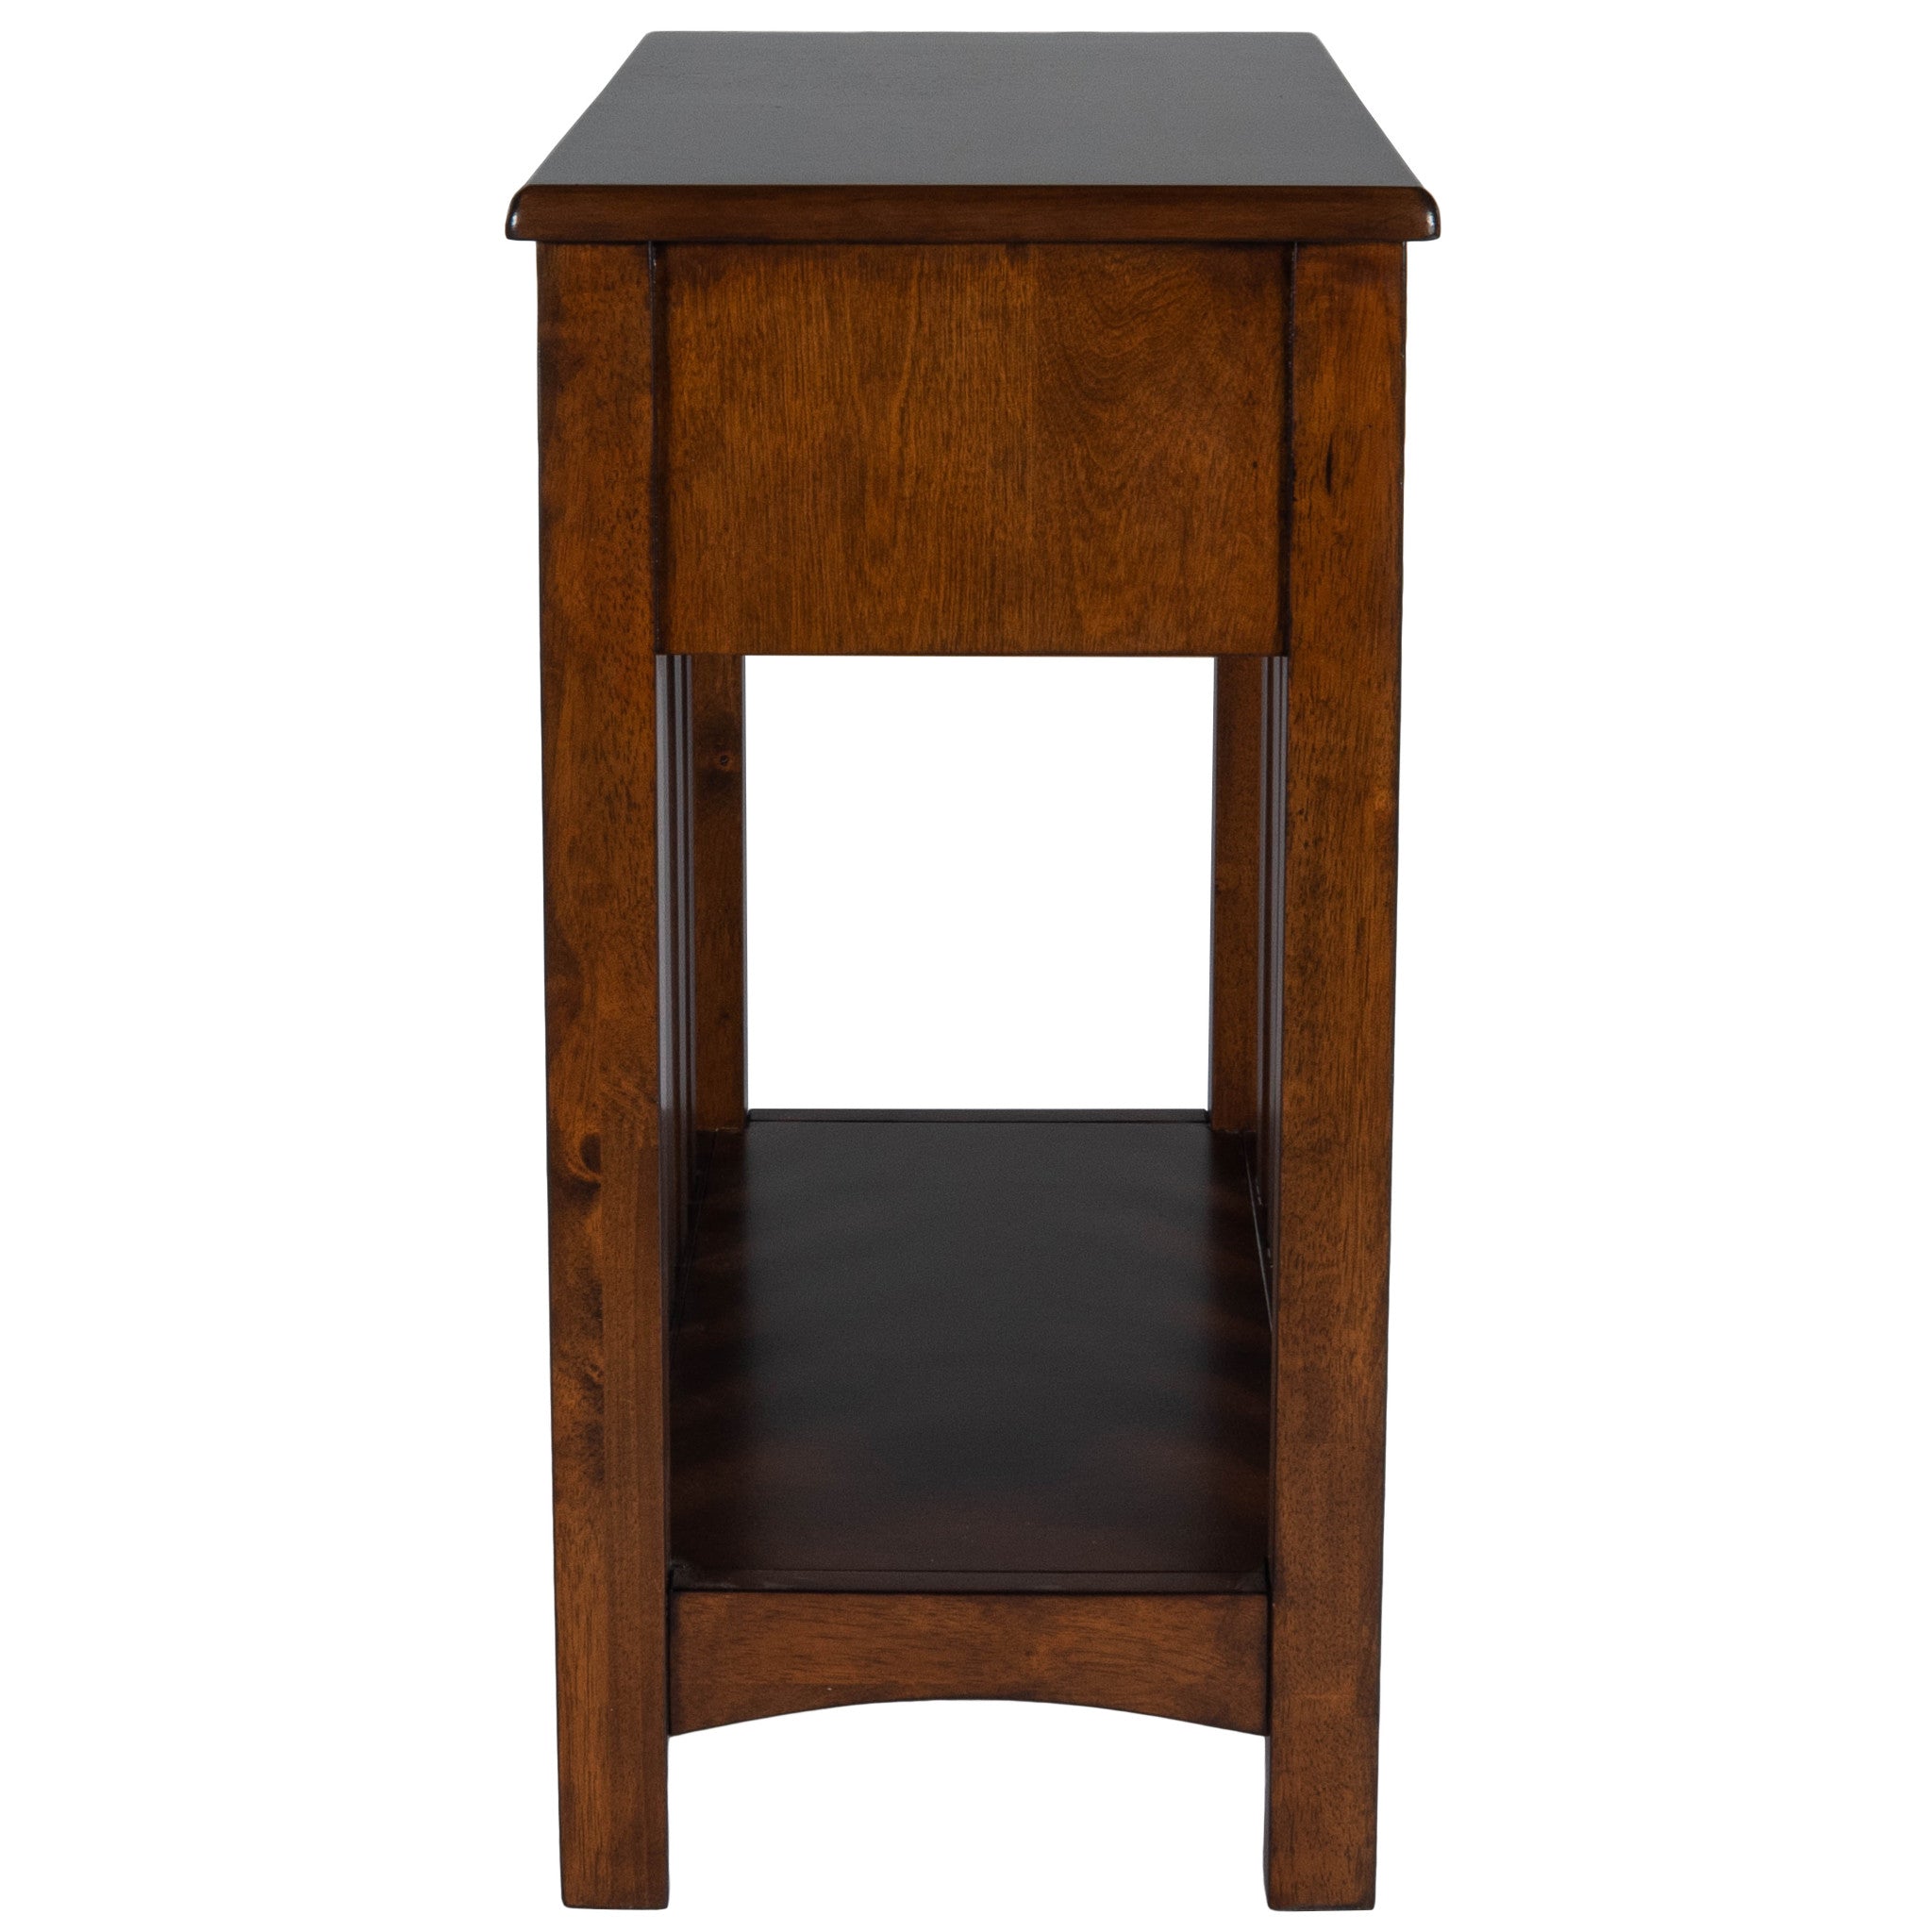 24" Dark Cherry Brown Rectangular End Table With Drawer And Shelf